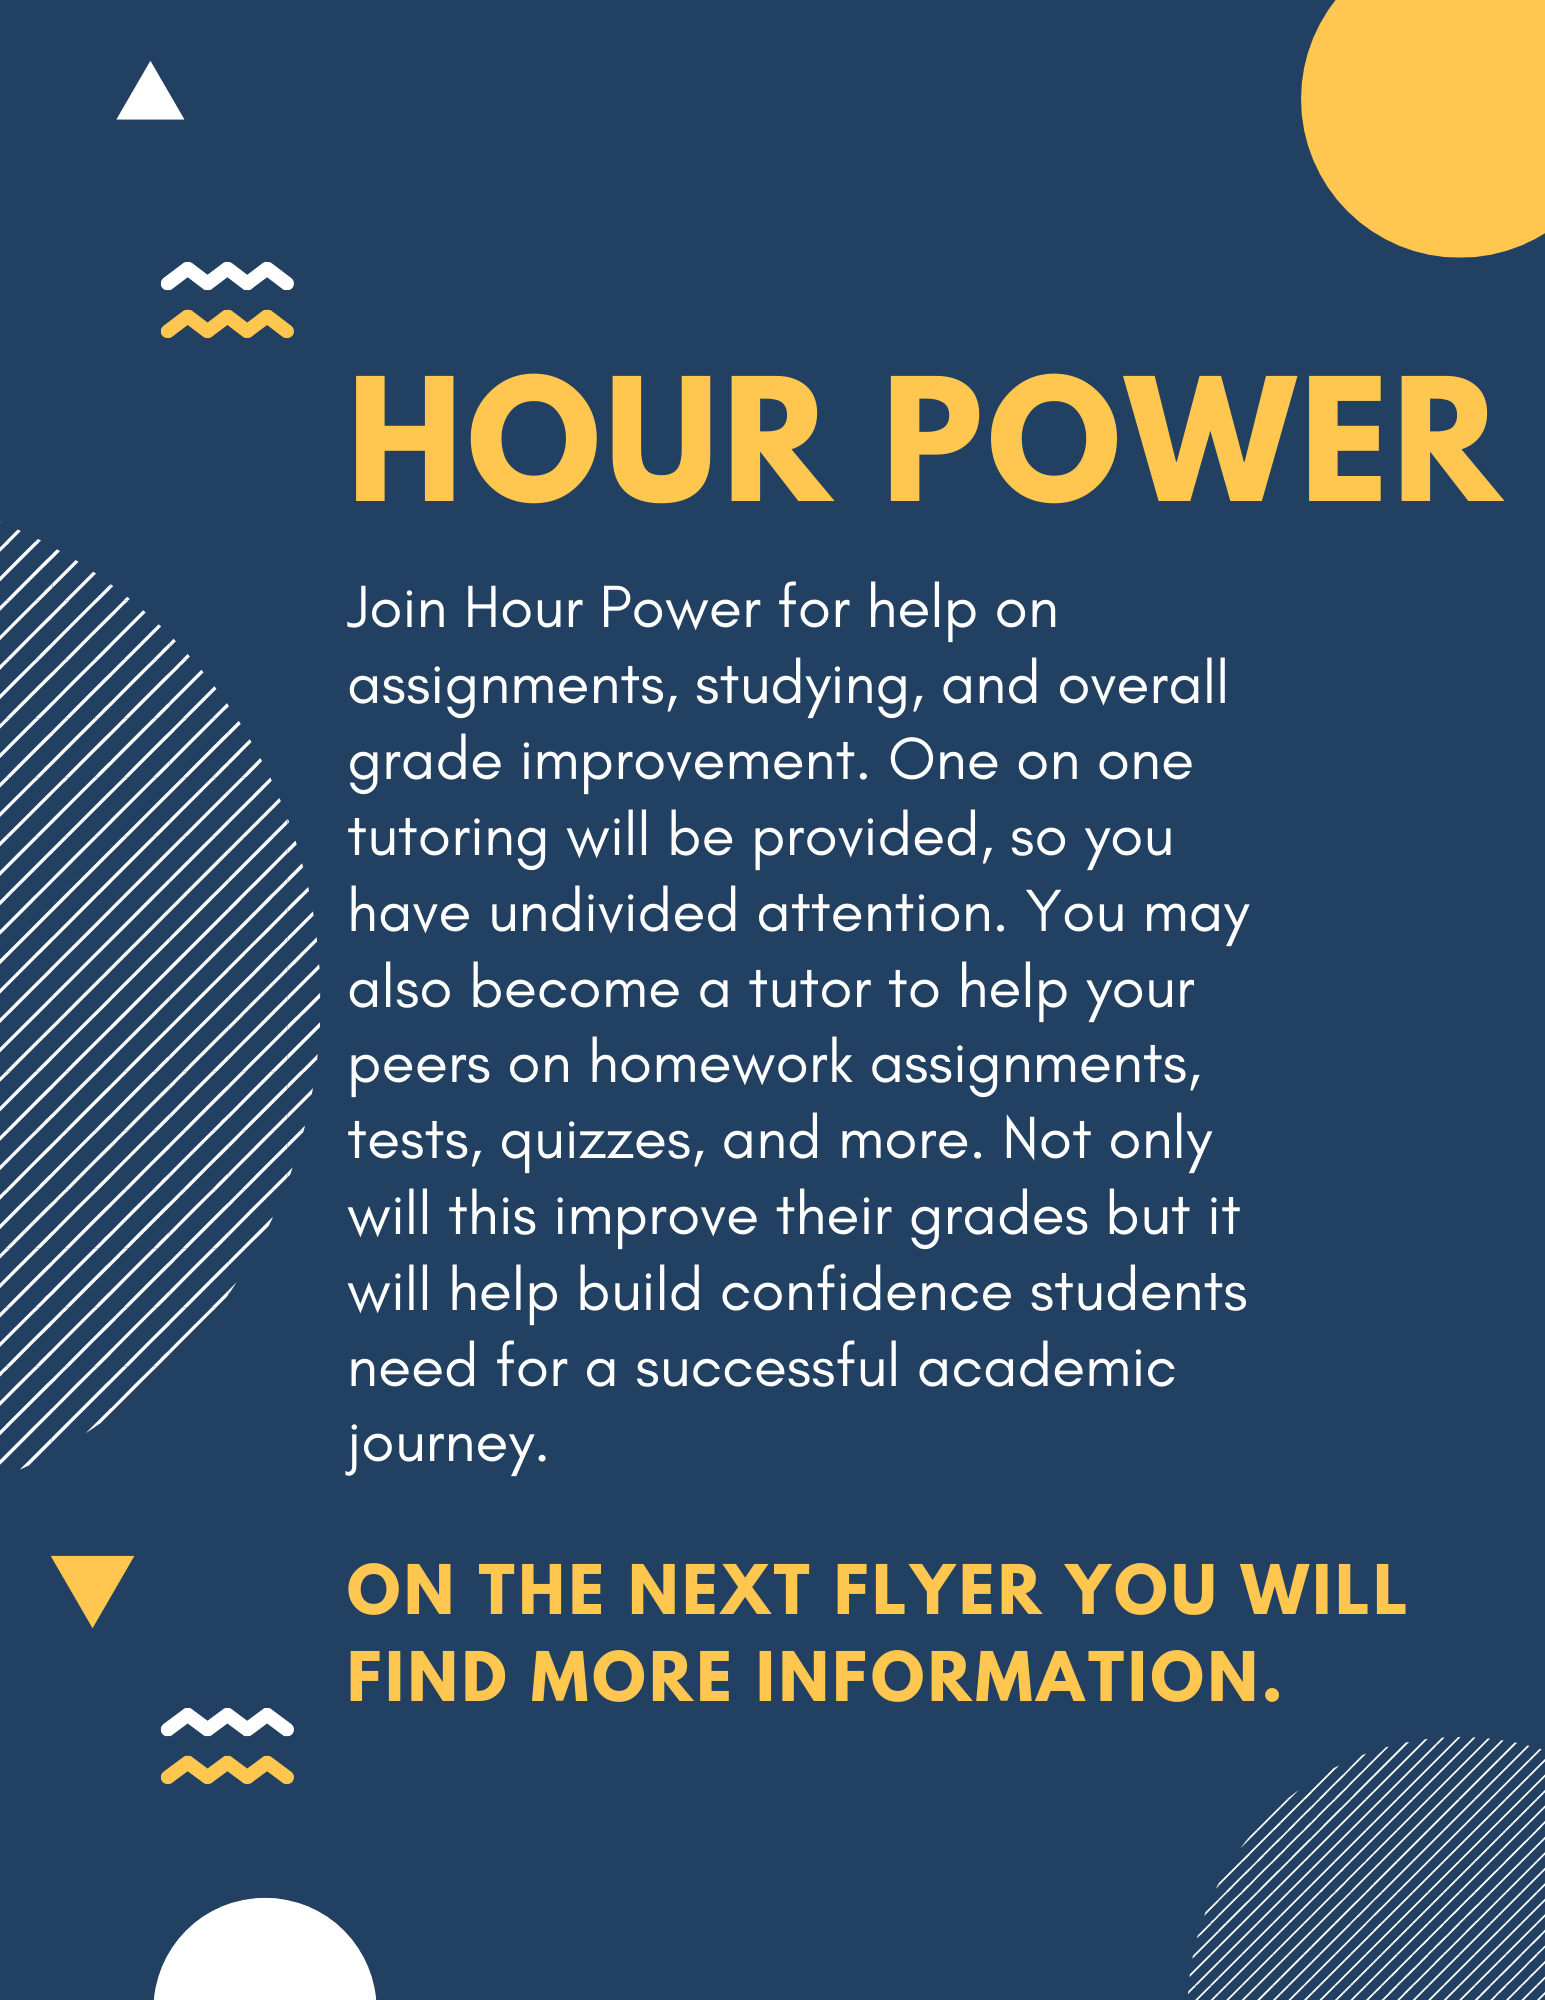 Do you need help with your homework? Or would you like to be a tutor and help others and earn community service hours? Join us at Hour Power, starting 9/6, from 7:15-8:15 am, every morning except for Wednesdays. 